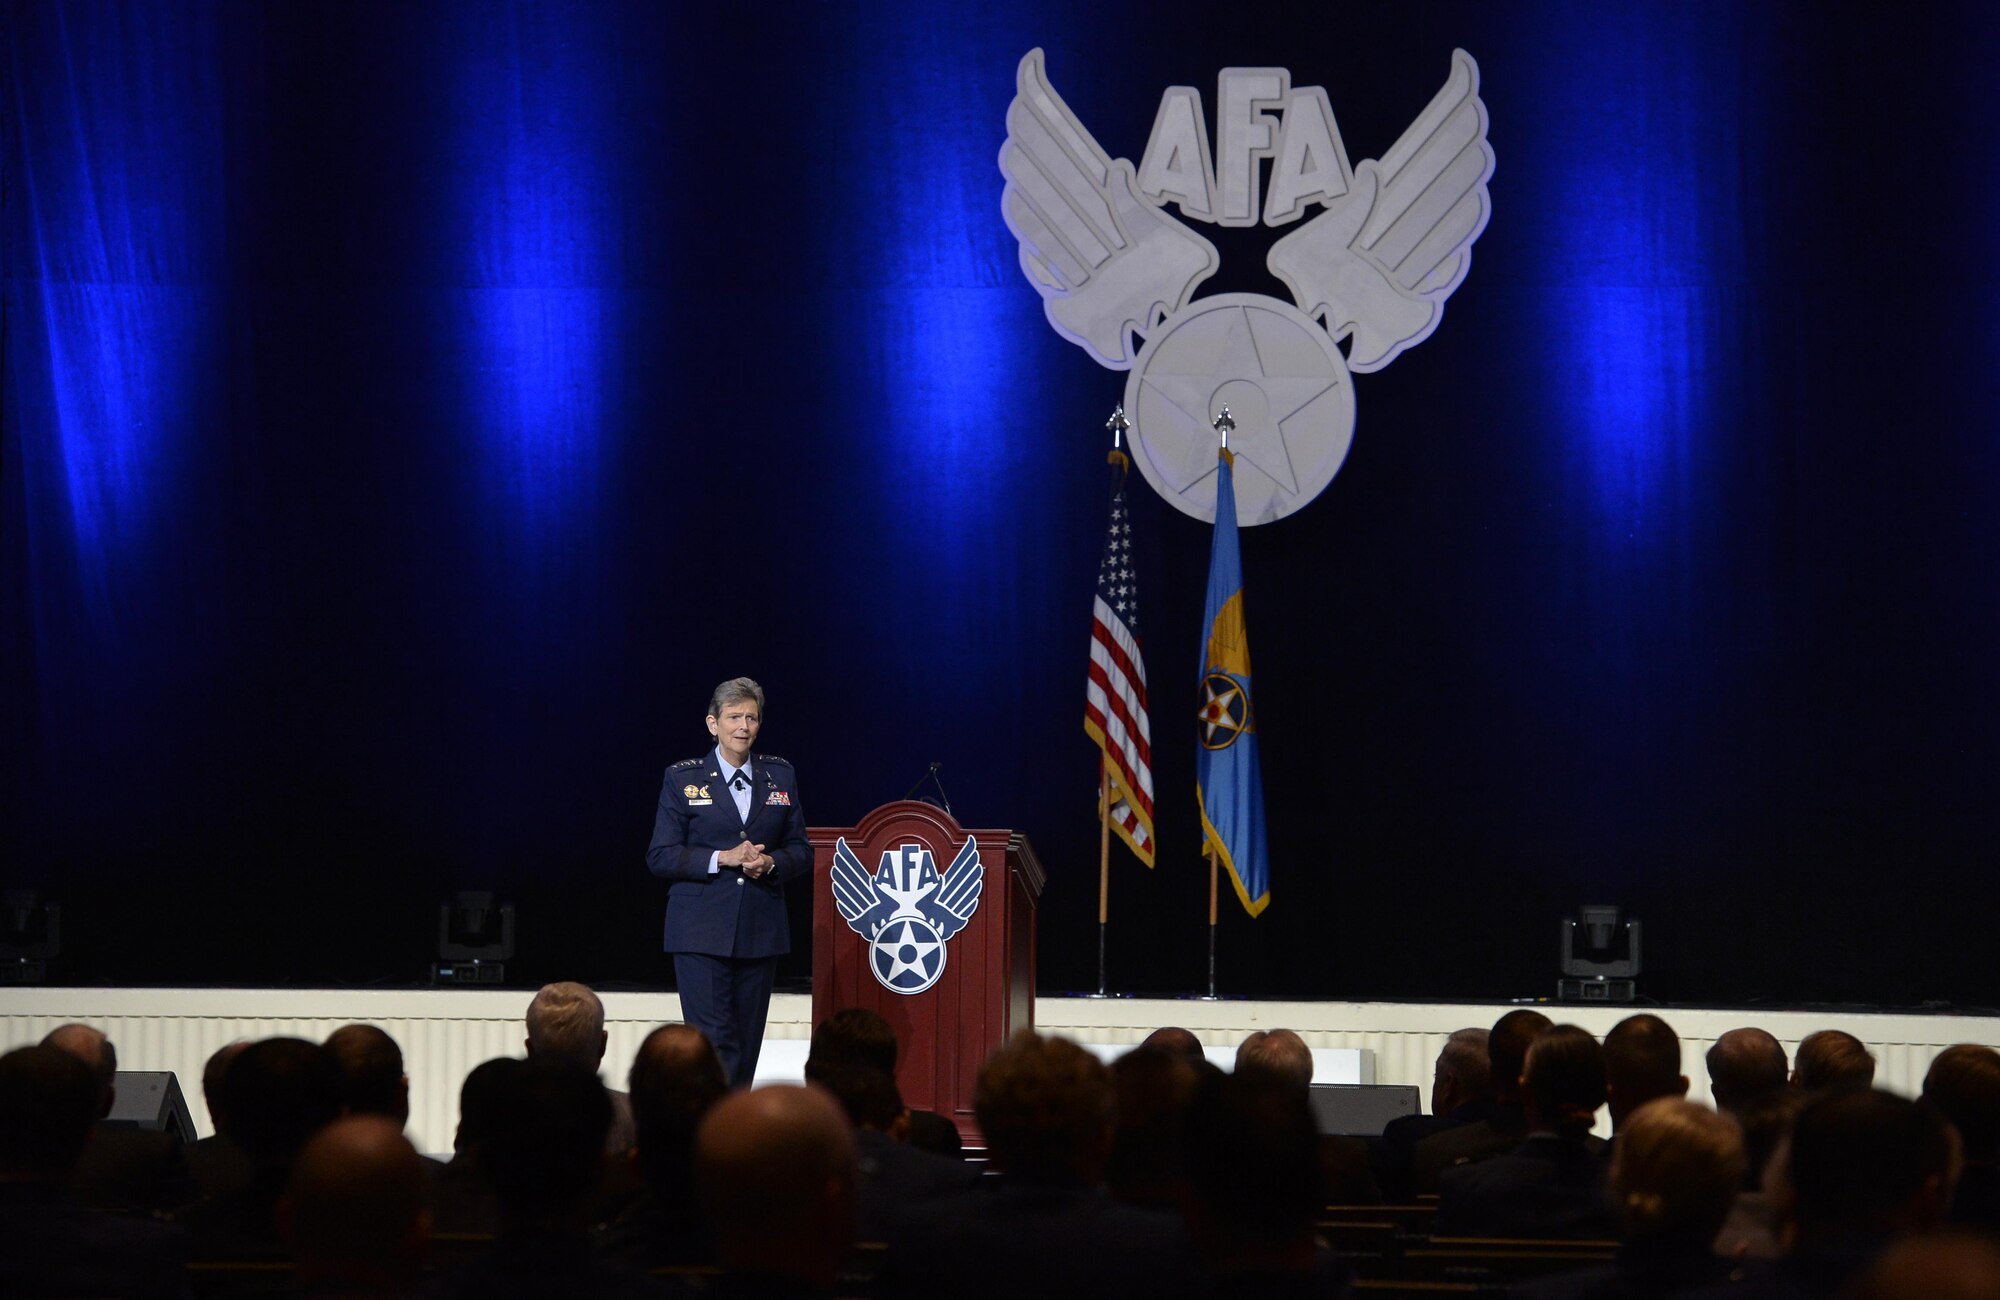 Gen. Ellen M. Pawlikowski, the Air Force Materiel Command commander, speaks to an audience during the Air Force Association's Air, Space and Cyber Conference in National Harbor, Md., Sept. 21, 2016. She spoke about the importance of cyber security. (U.S. Air Force photo/Staff Sgt. Whitney Stanfield)

